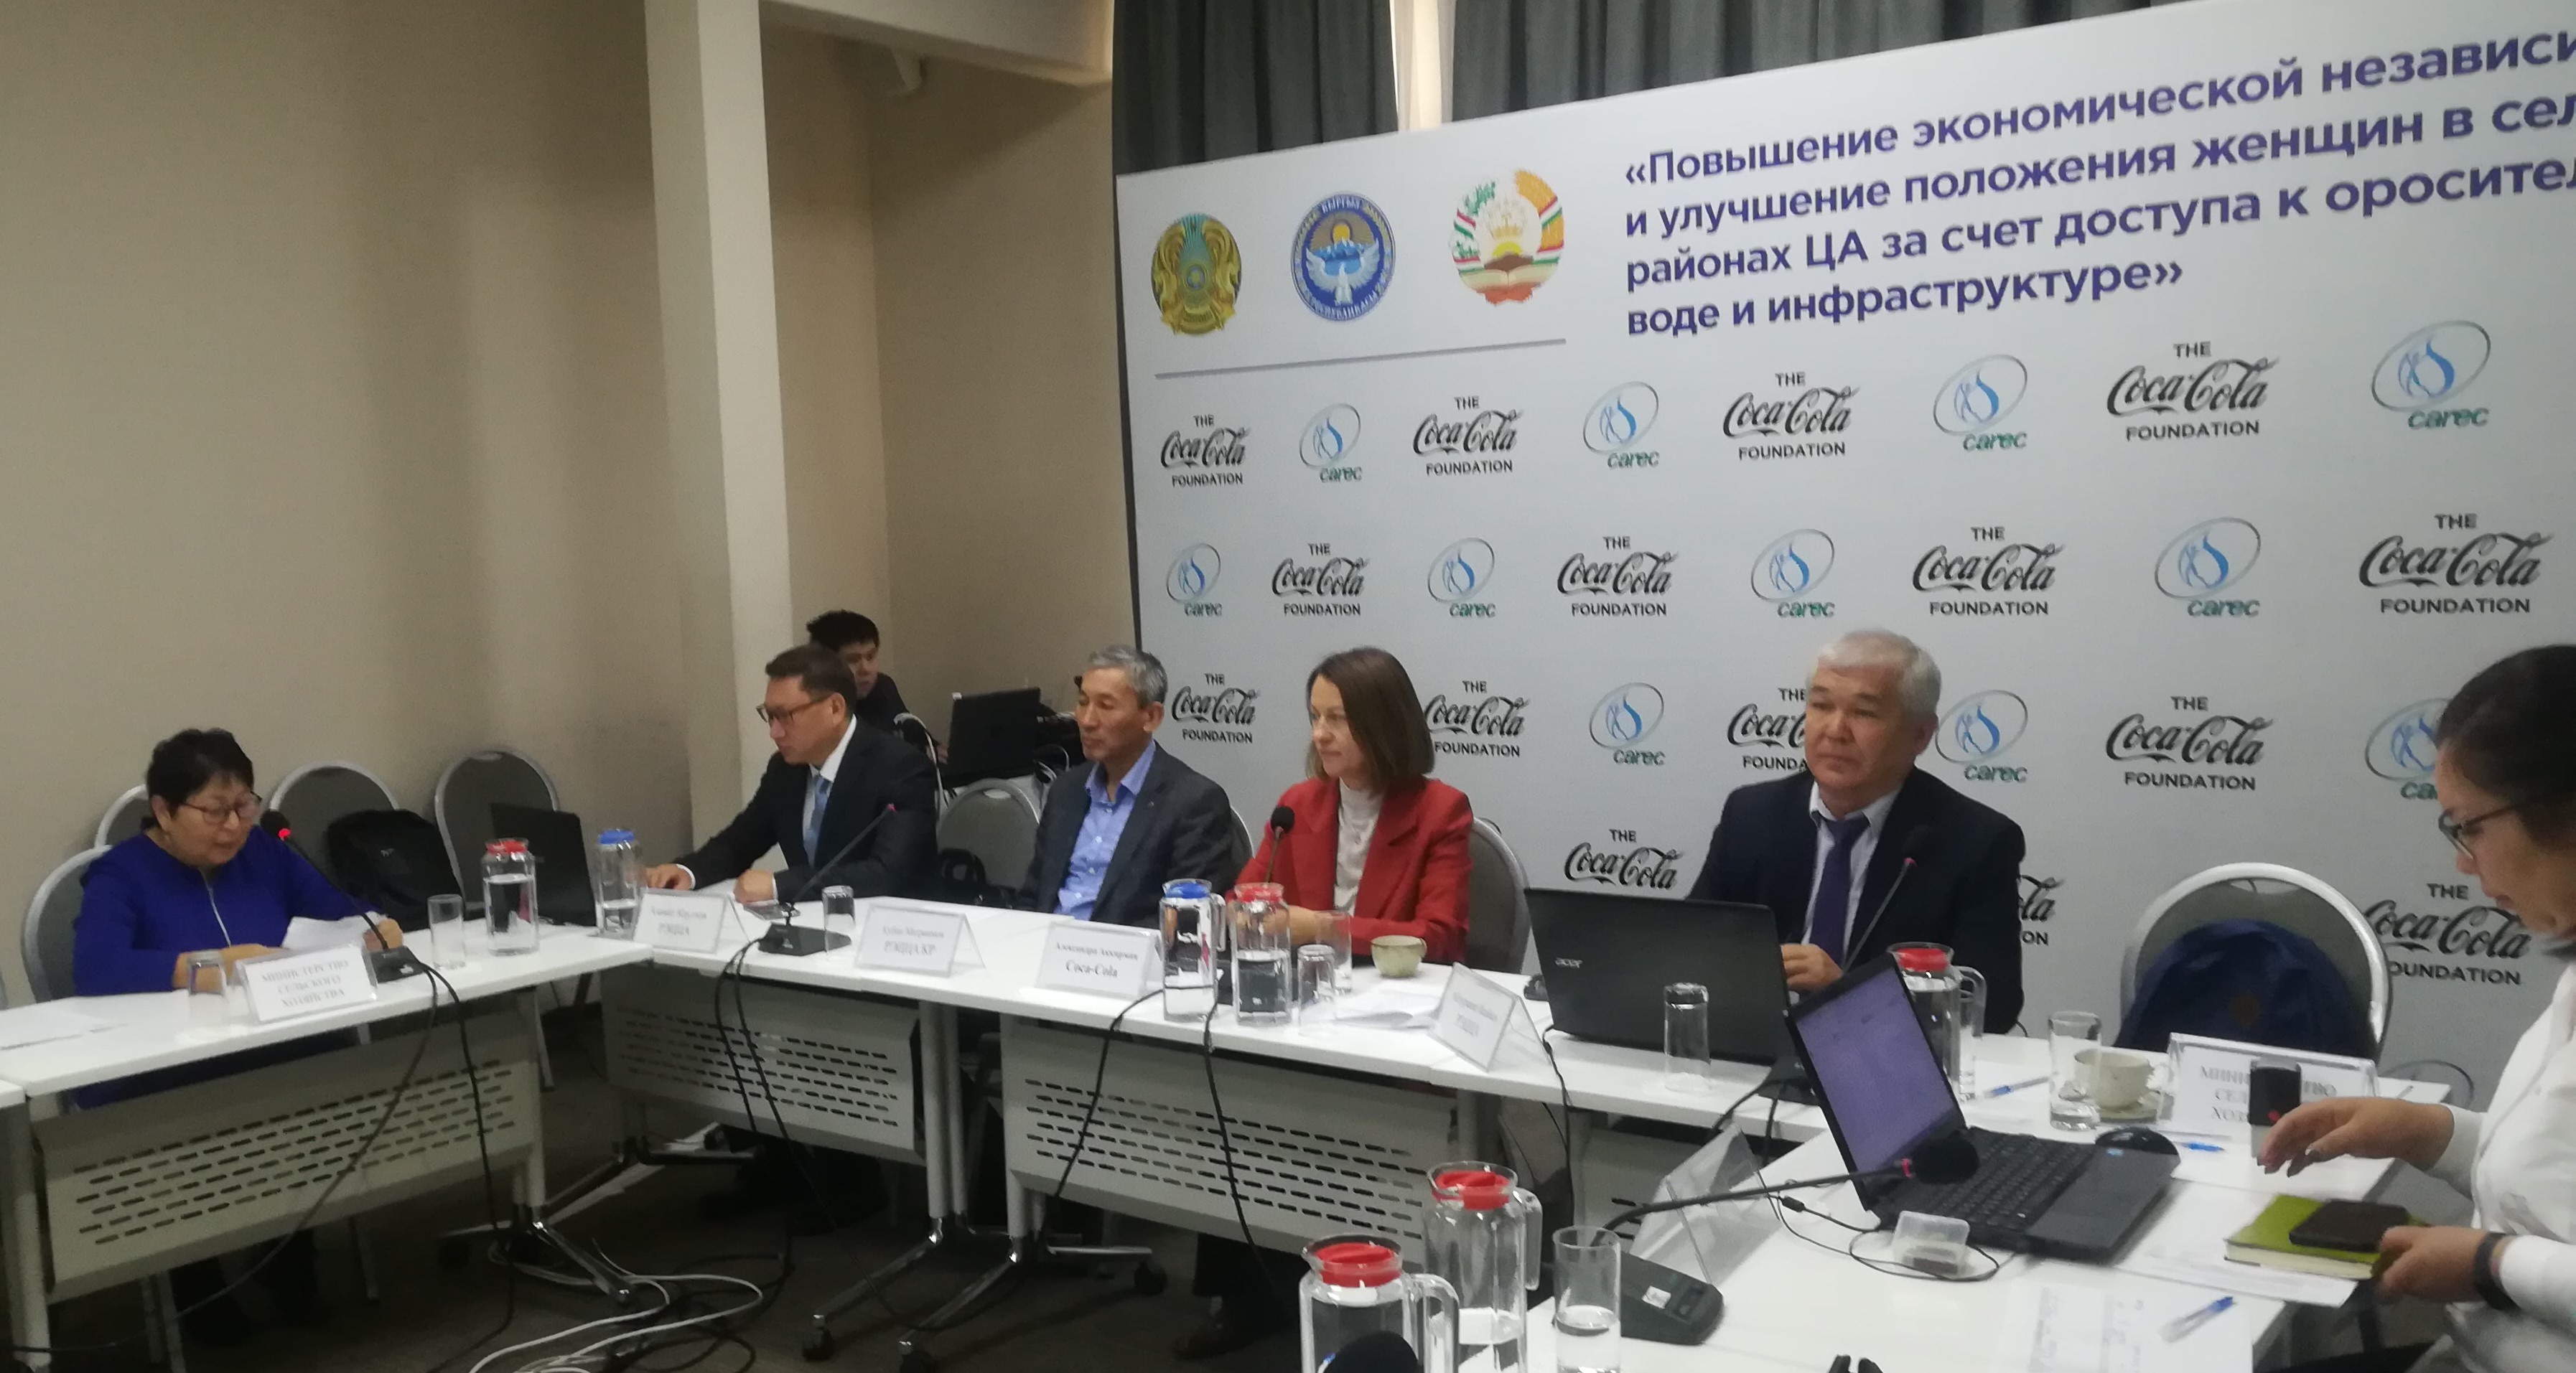 Water resources management in Central Asia: starting small, achieving greater